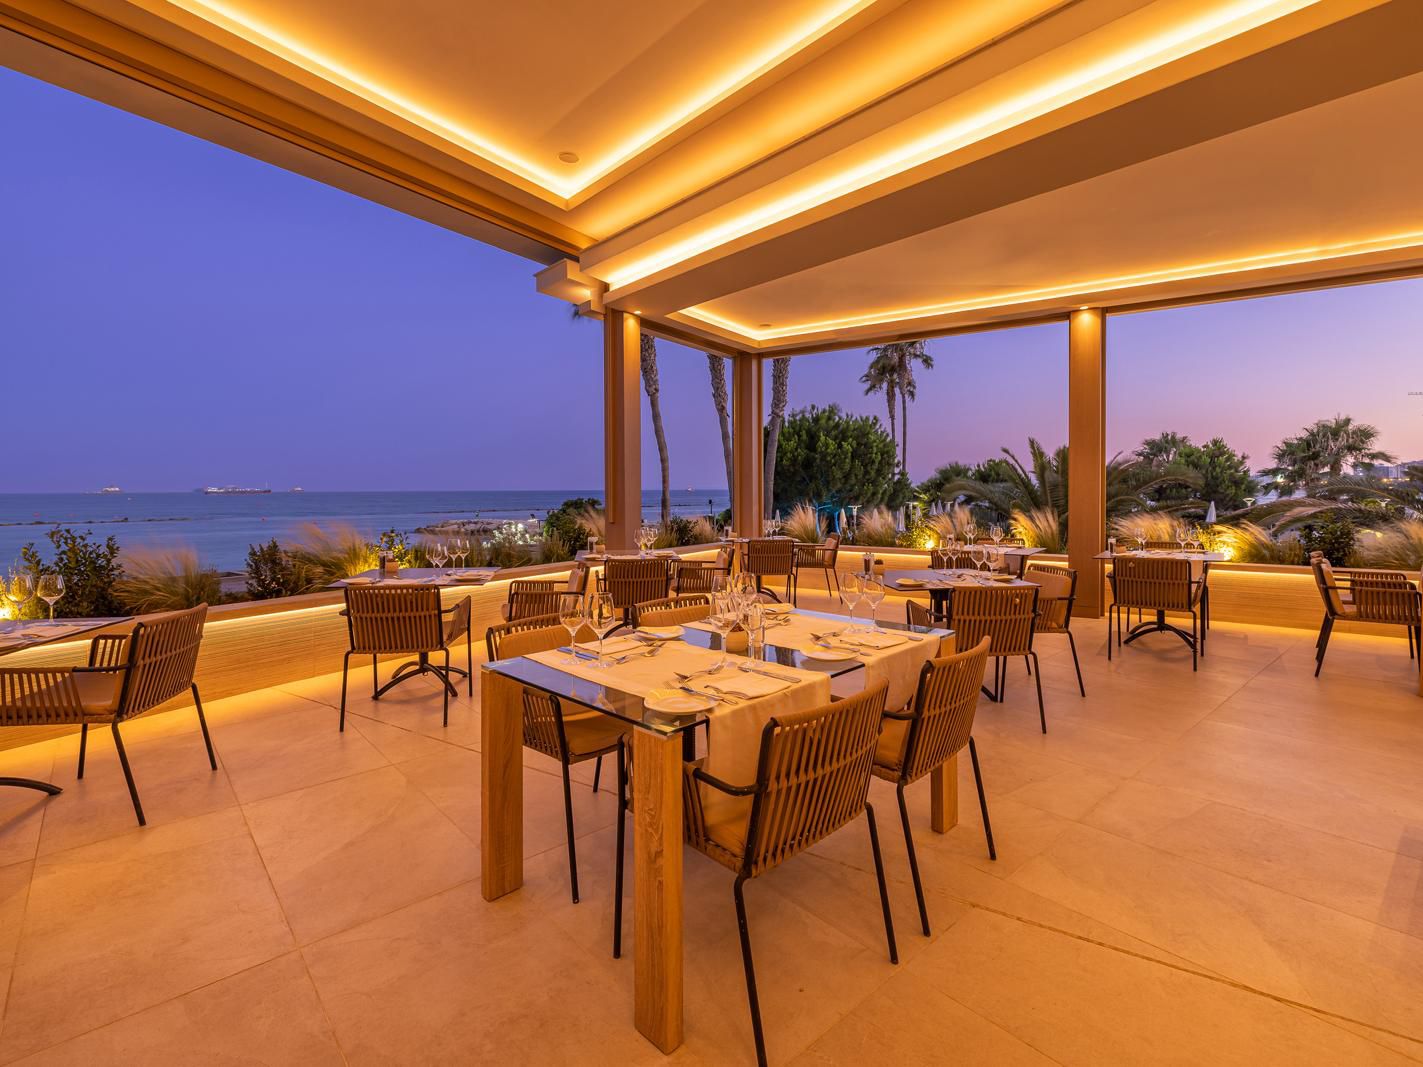 Whether you're looking for a casual bite to eat or a more elaborate dining affair, we’ve got you covered. Breakfast, lunch and dinner can all be enjoyed outdoors, right on the waterfront. Our revamped Mediterranean Fusion restaurant LA BREZZA is a must when visiting Limassol. KAI, our summer Sushi Bar, is well-worth a visit.